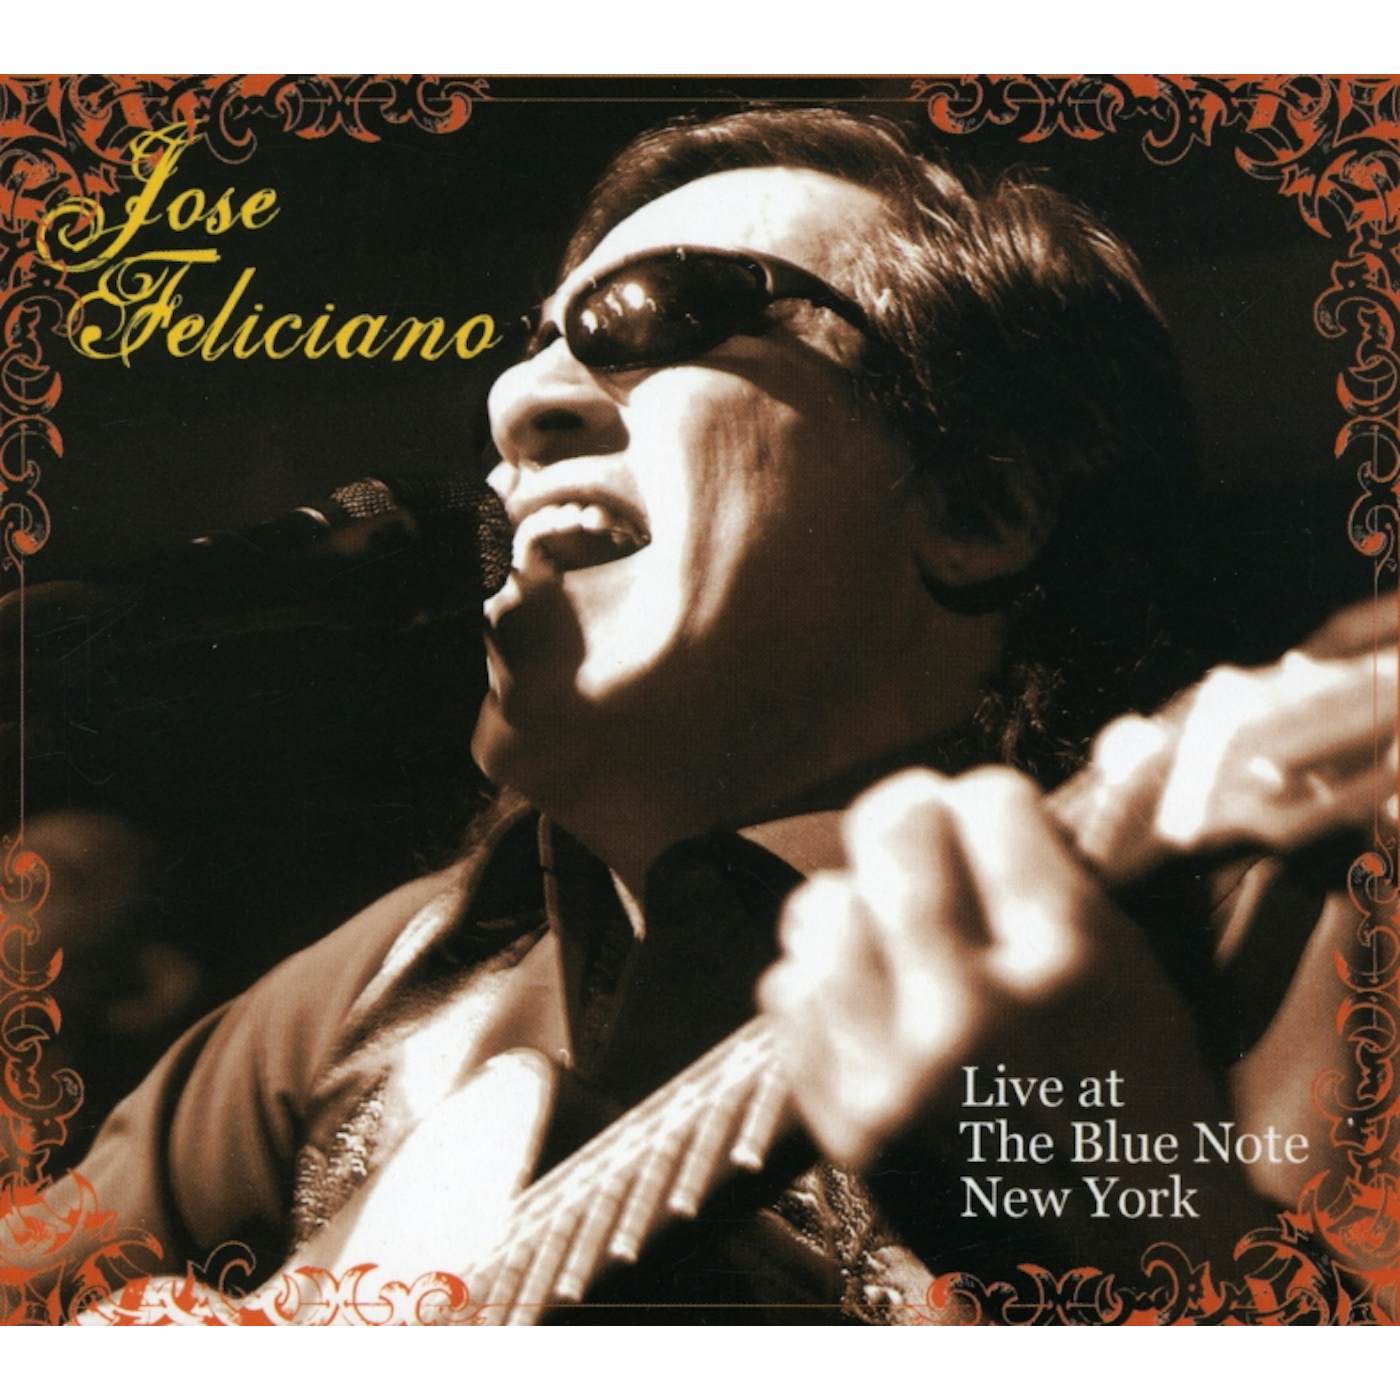 José Feliciano LIVE AT THE BLUE NOTE NEW YORK CD